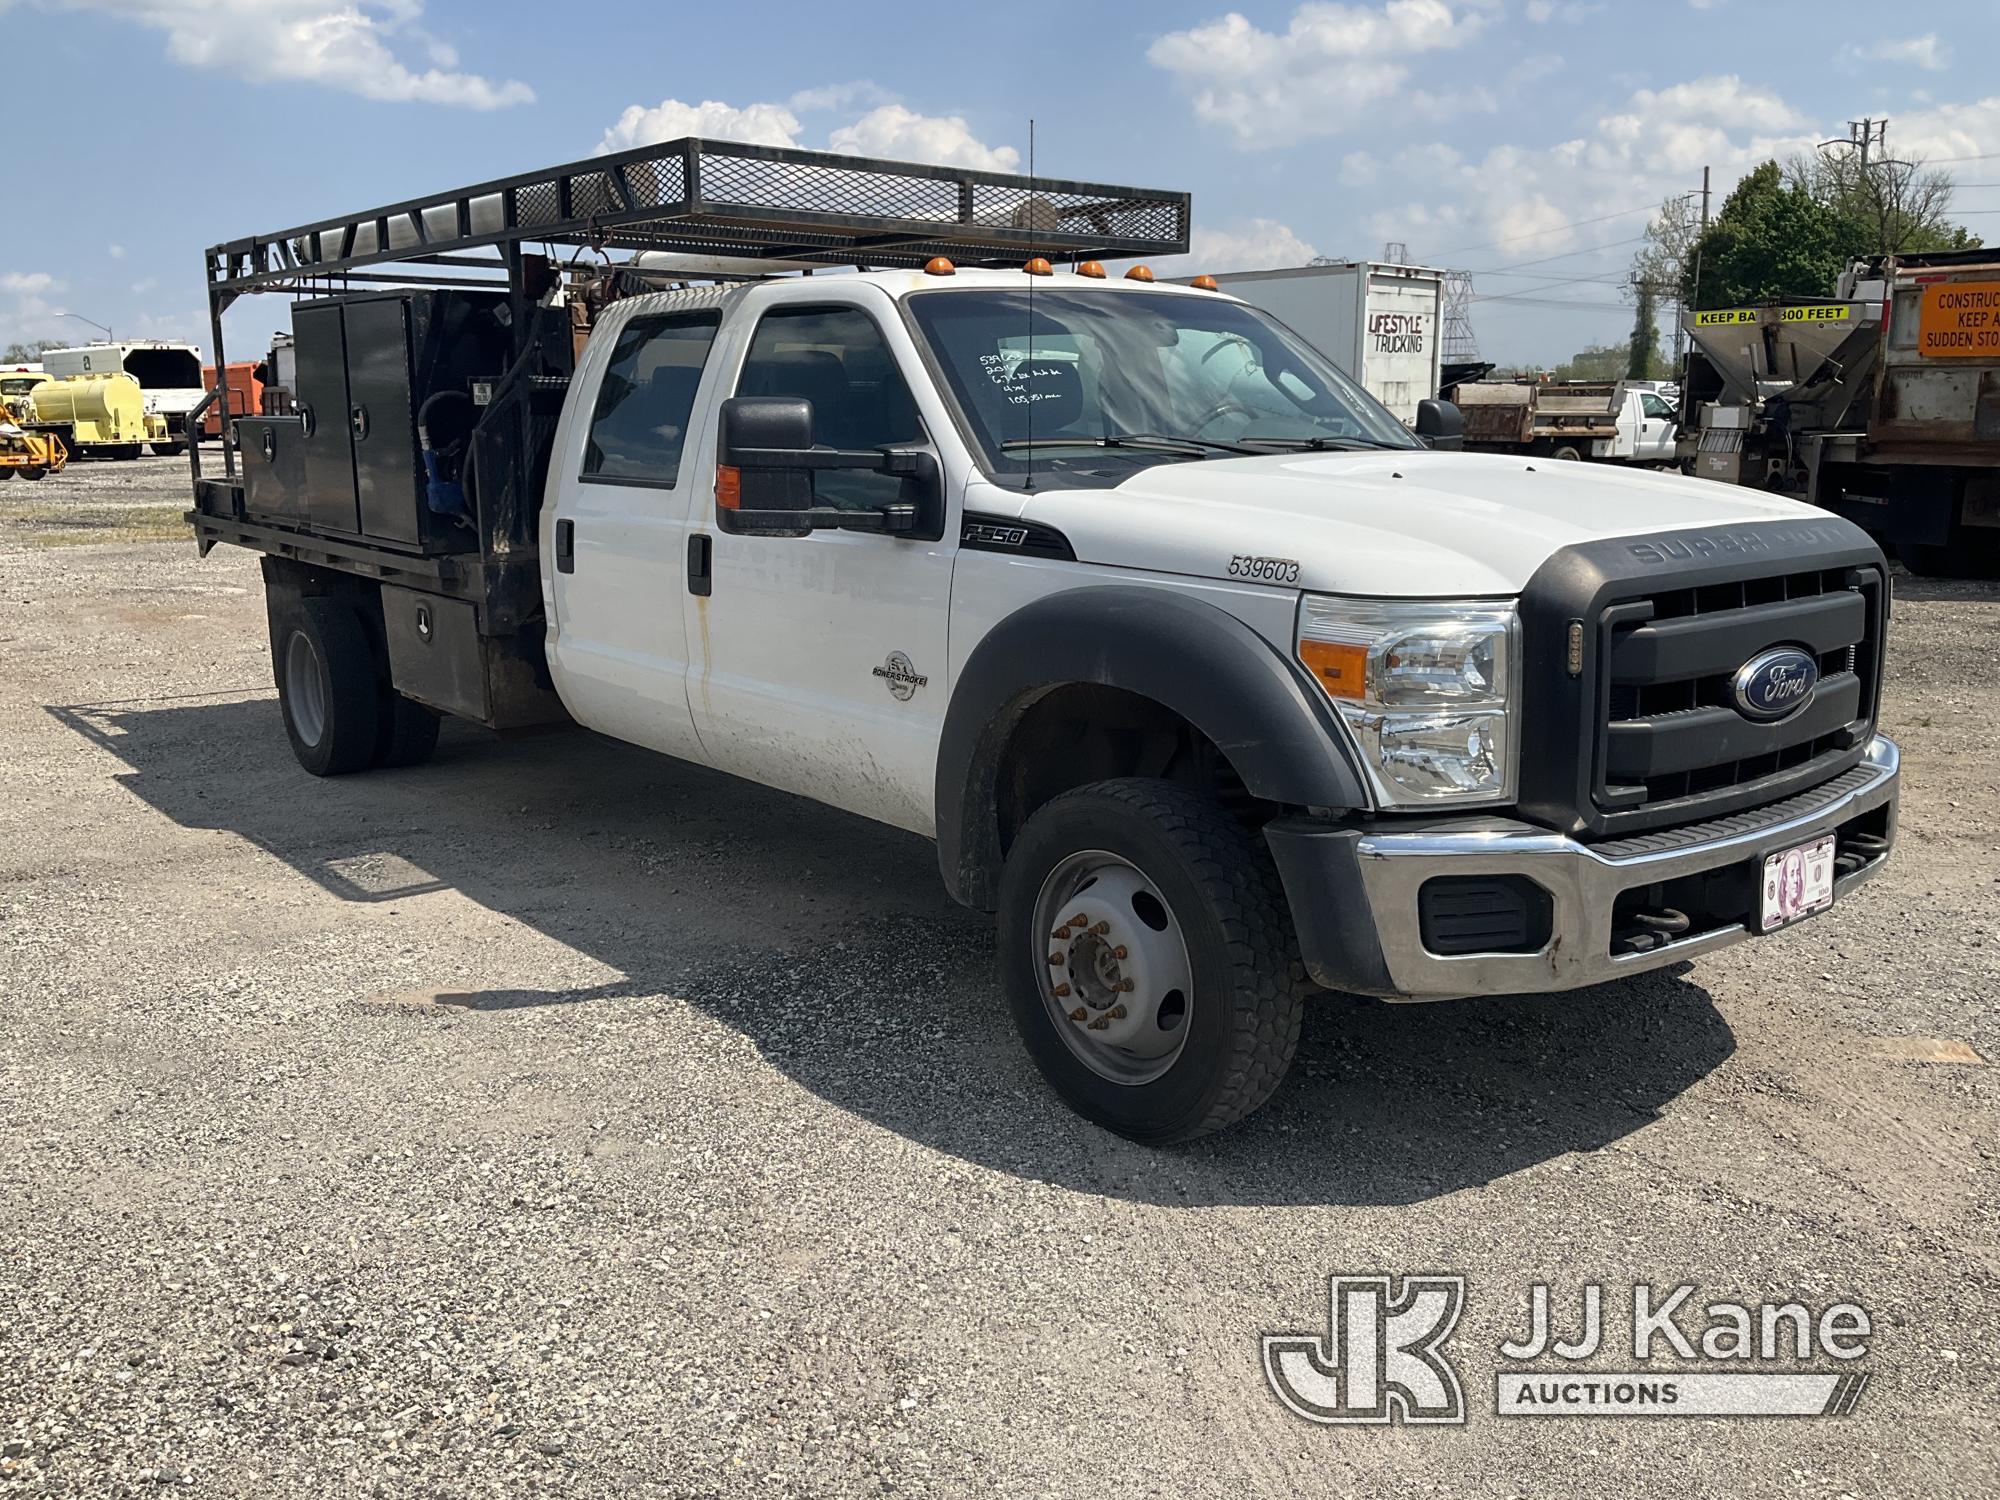 (Plymouth Meeting, PA) 2016 Ford F550 4x4 Crew-Cab Flatbed Truck Runs & Moves, Body & Rust Damage